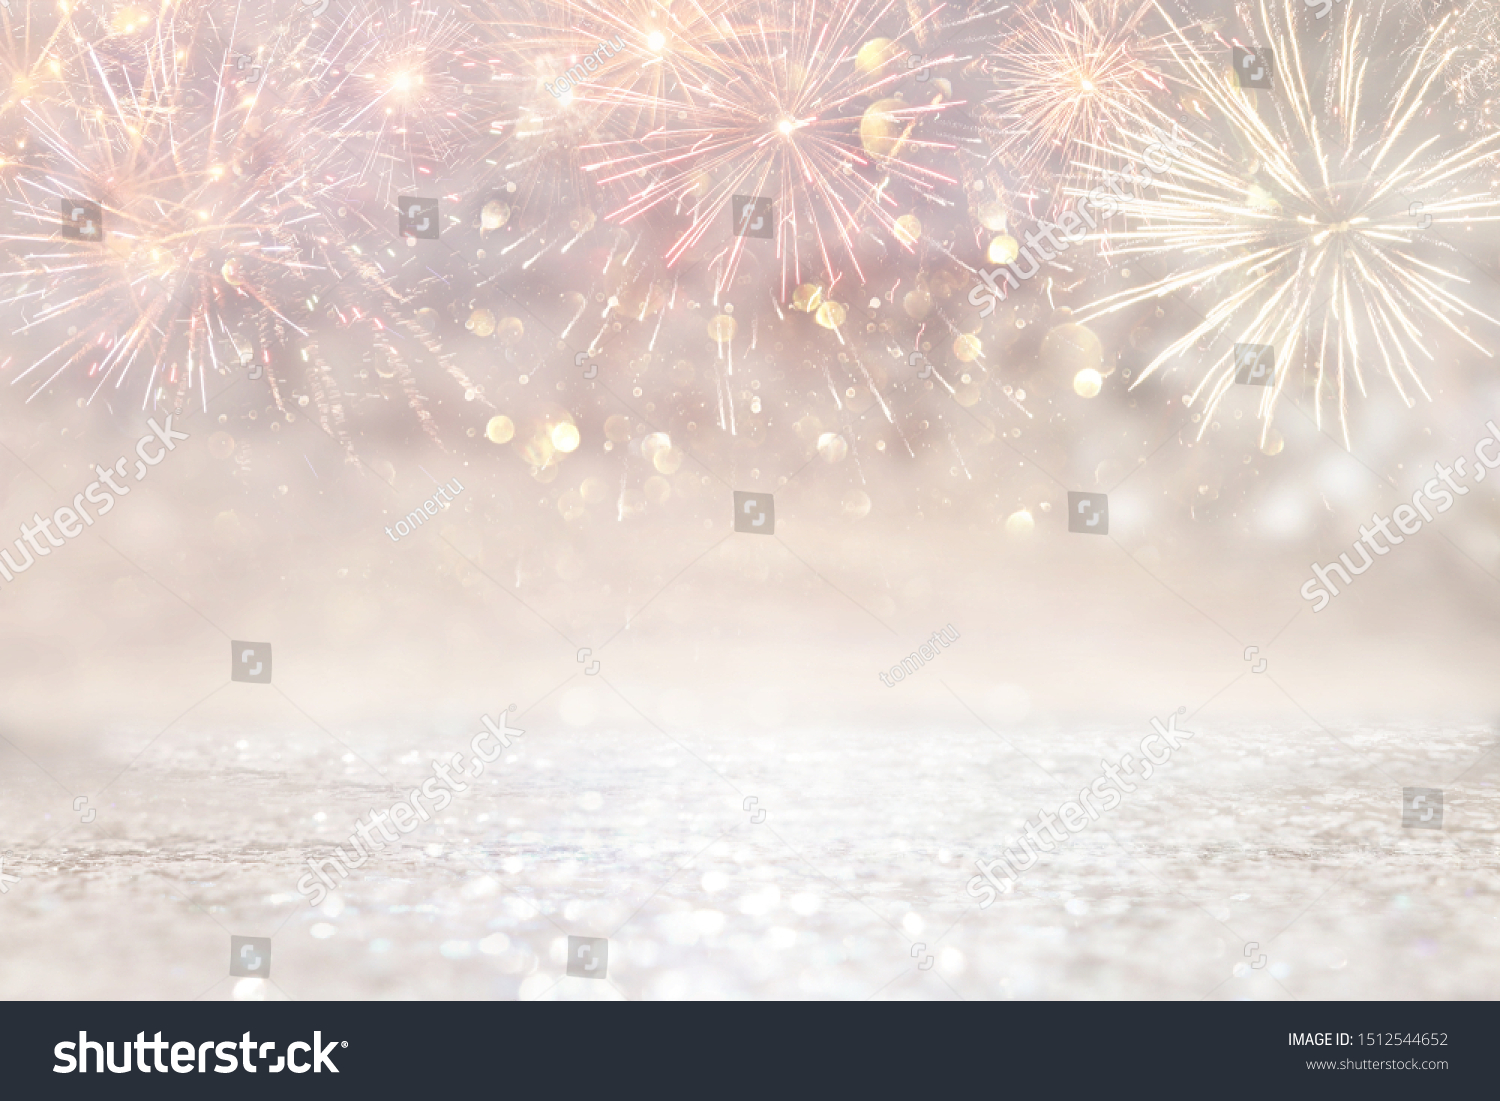 abstract gold and silver glitter background with fireworks. christmas eve, 4th of july holiday concept #1512544652